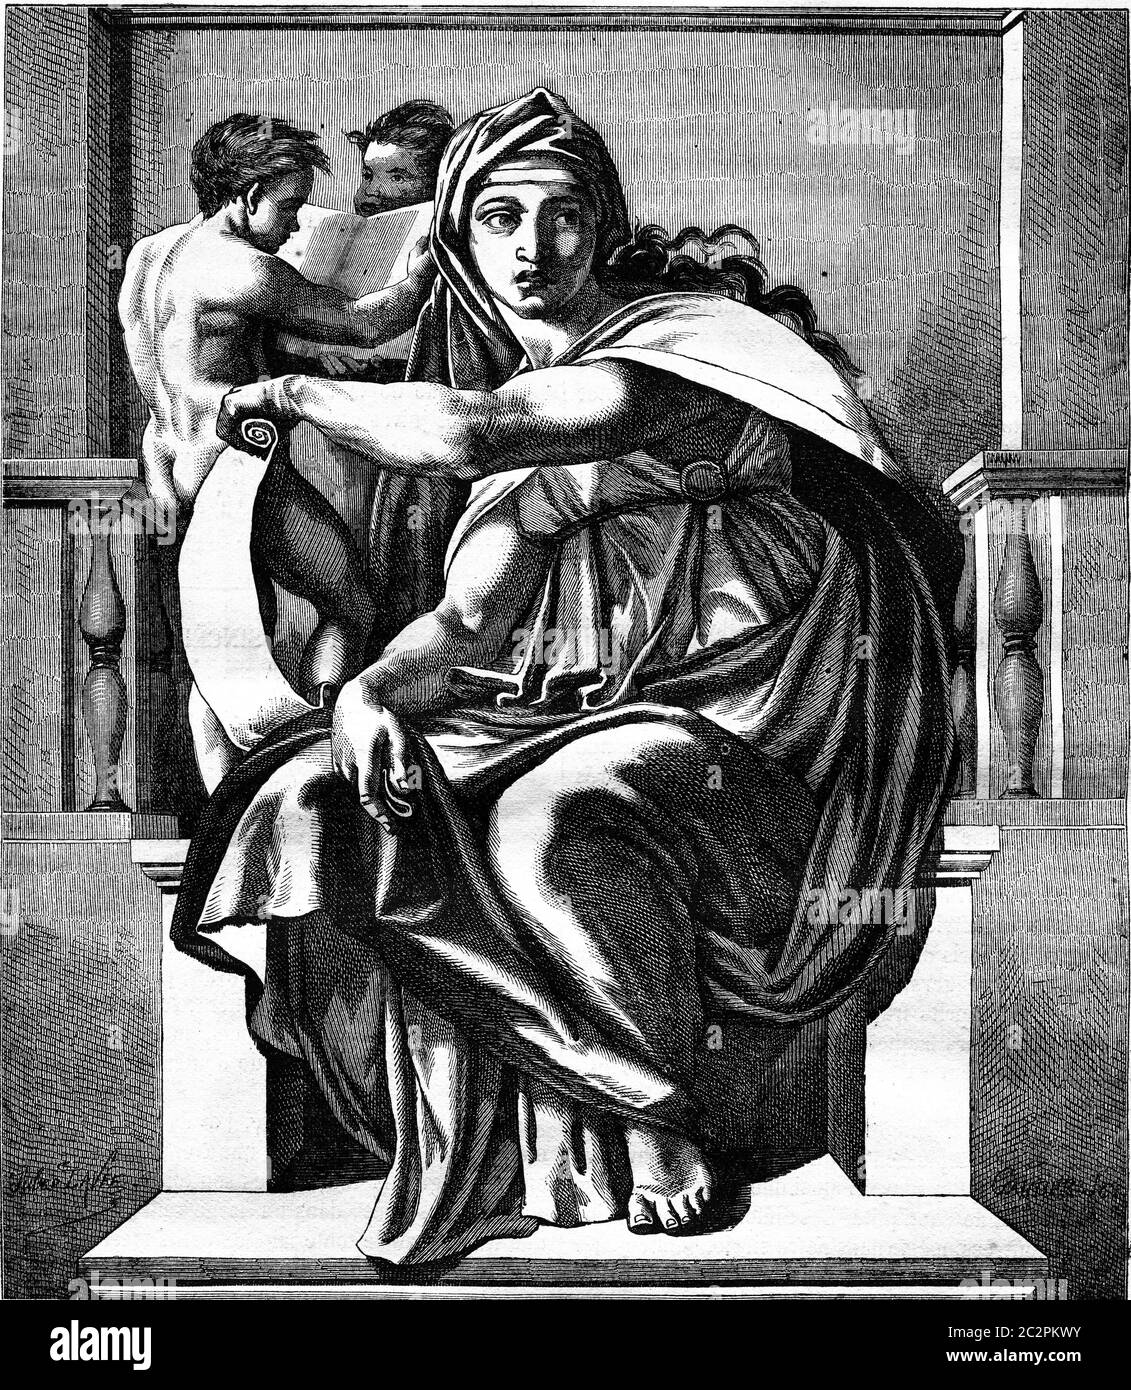 Sistine Chapel, The Delphic Sibyl, fresco by Michelangelo, vintage engraved illustration. Magasin Pittoresque 1877. Stock Photo